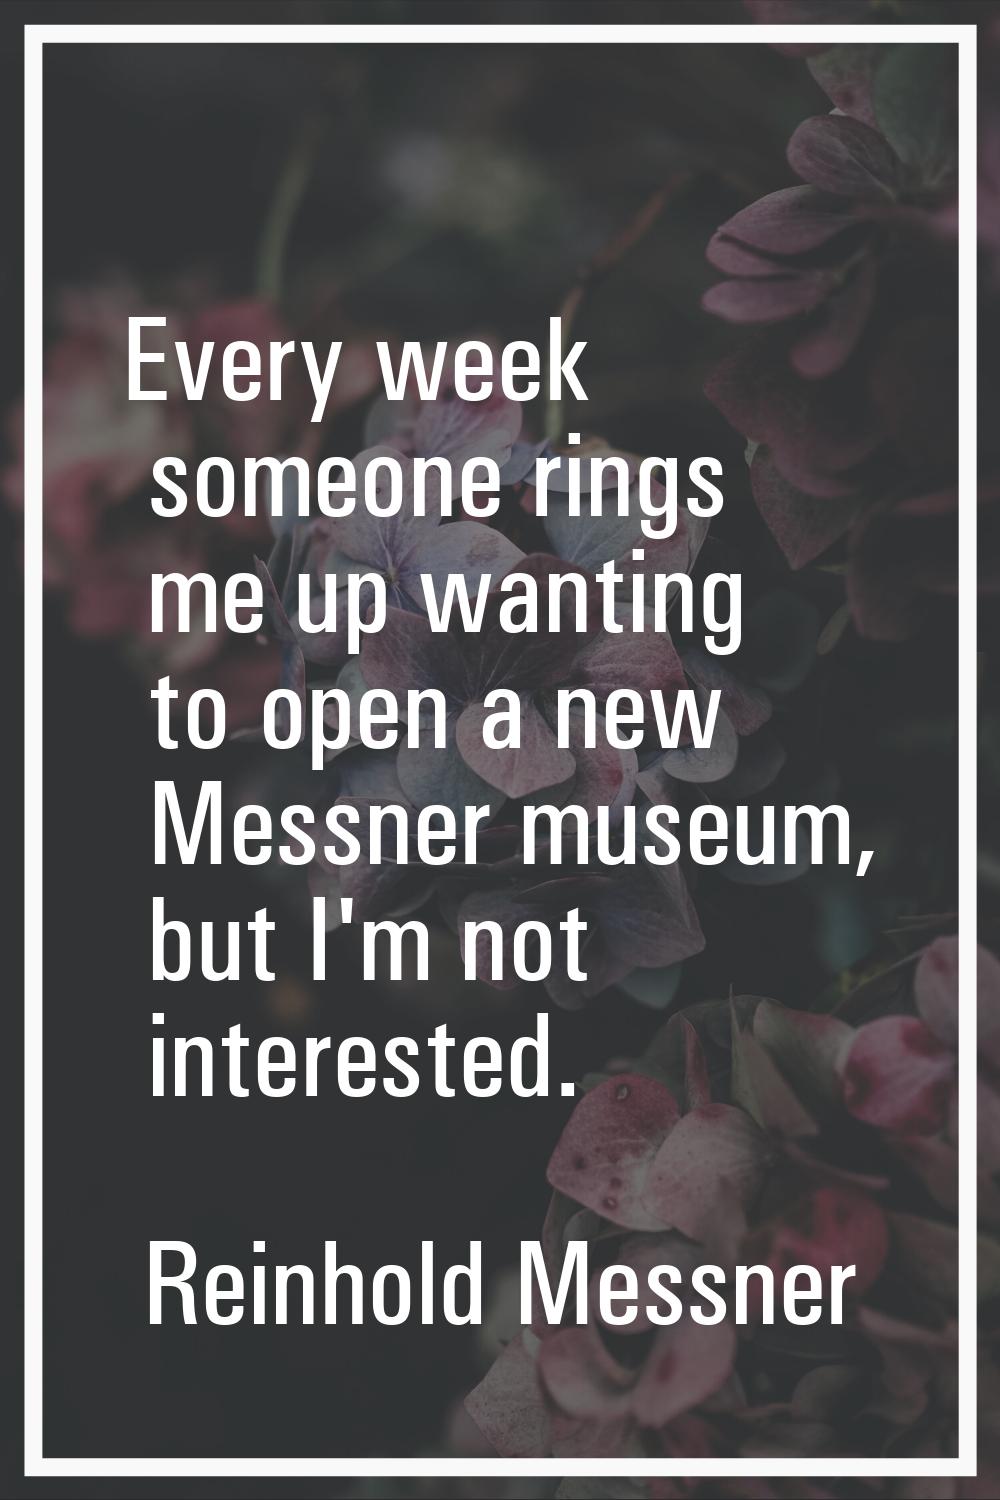 Every week someone rings me up wanting to open a new Messner museum, but I'm not interested.